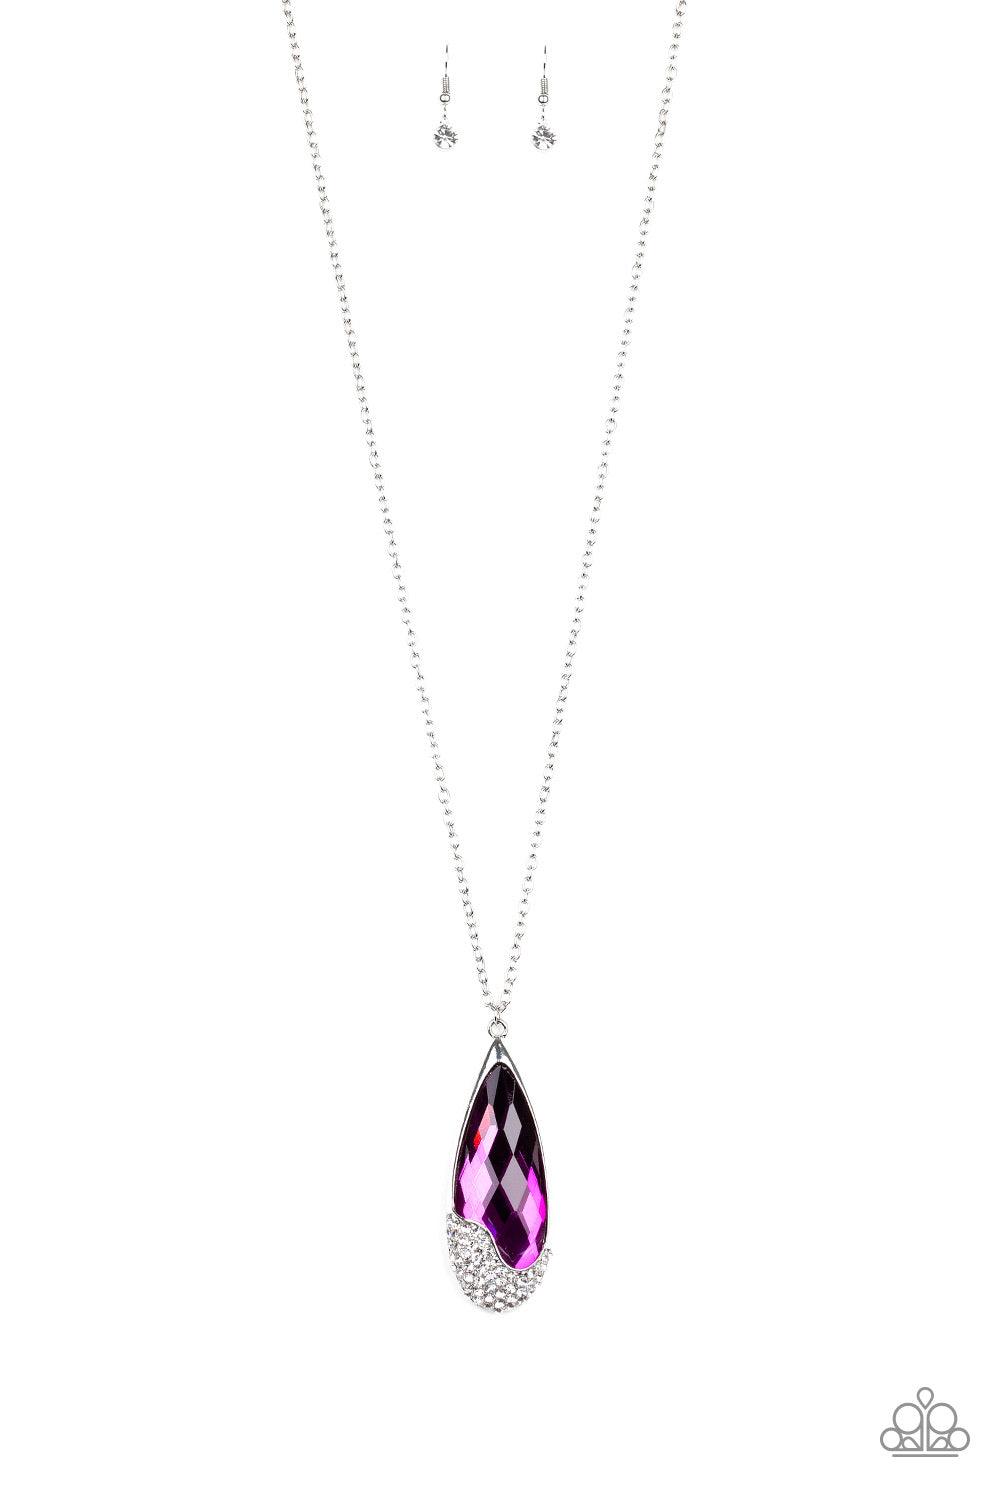 Paparazzi Accessories Spellbound - Purple An oversized purple teardrop gem is nestled inside of an abstract silver frame that has been dipped in glassy white rhinestones. The spellbinding pendant swings from the bottom of a lengthened silver chain for a g